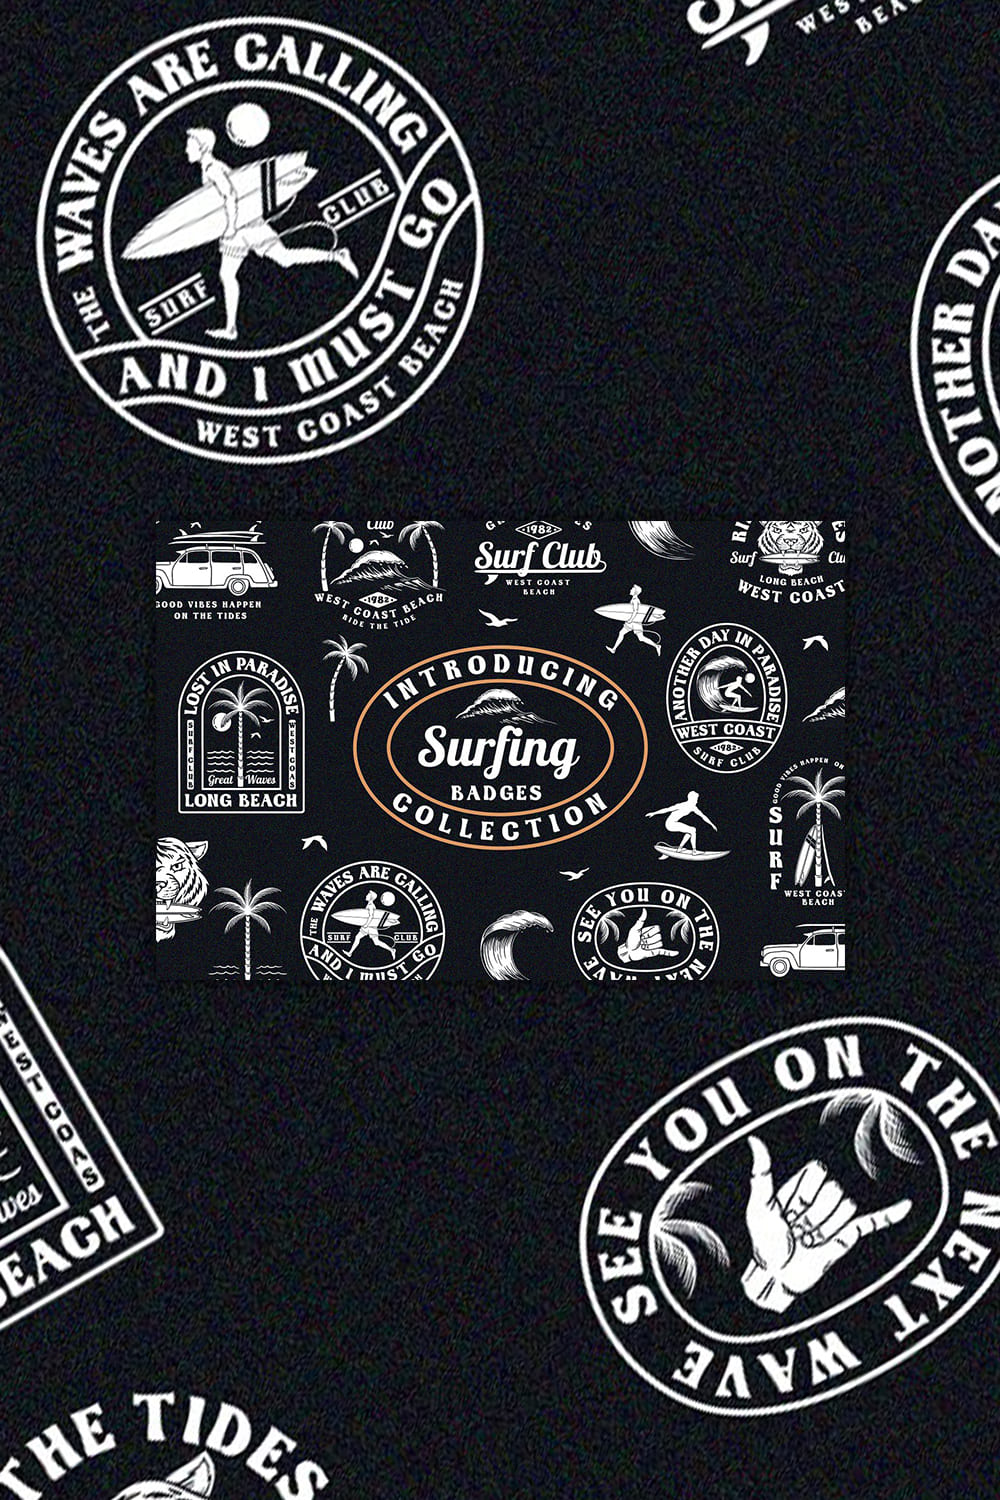 Surfing Badges Collection.